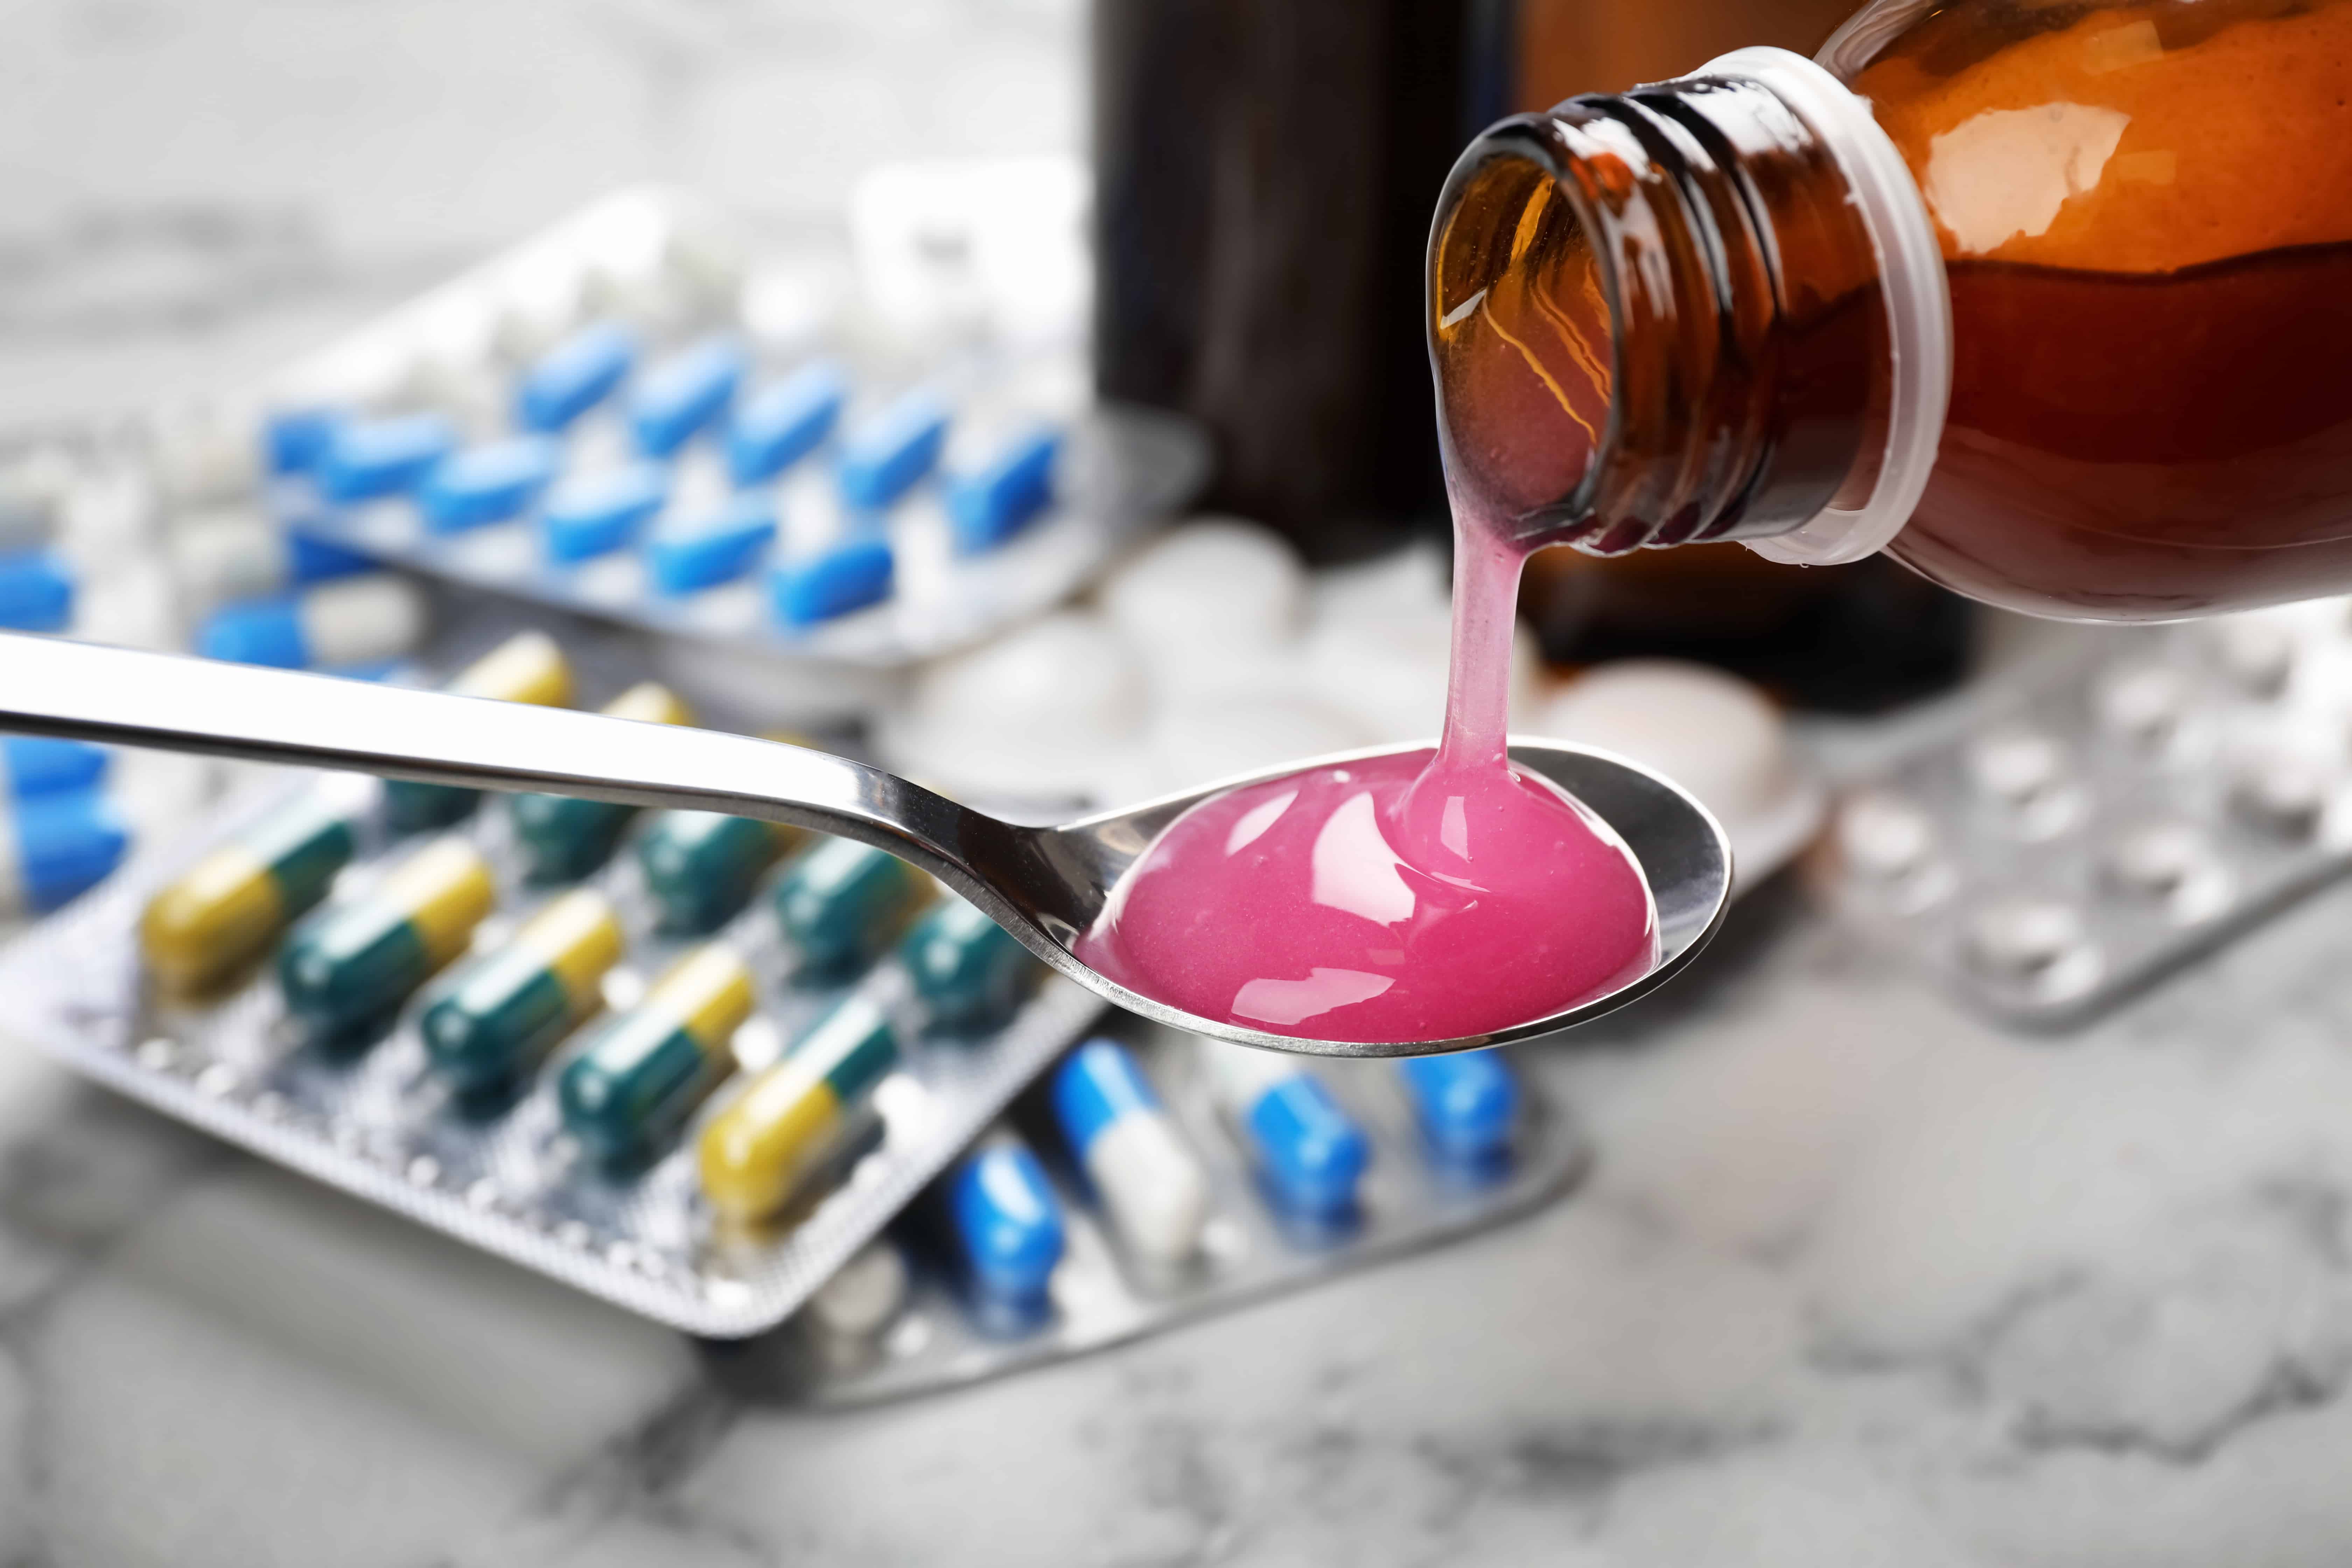 Dangers Of Mixing Xanax And Codeine - Effects Of Alprazolam And Codeine Polydrug Abuse